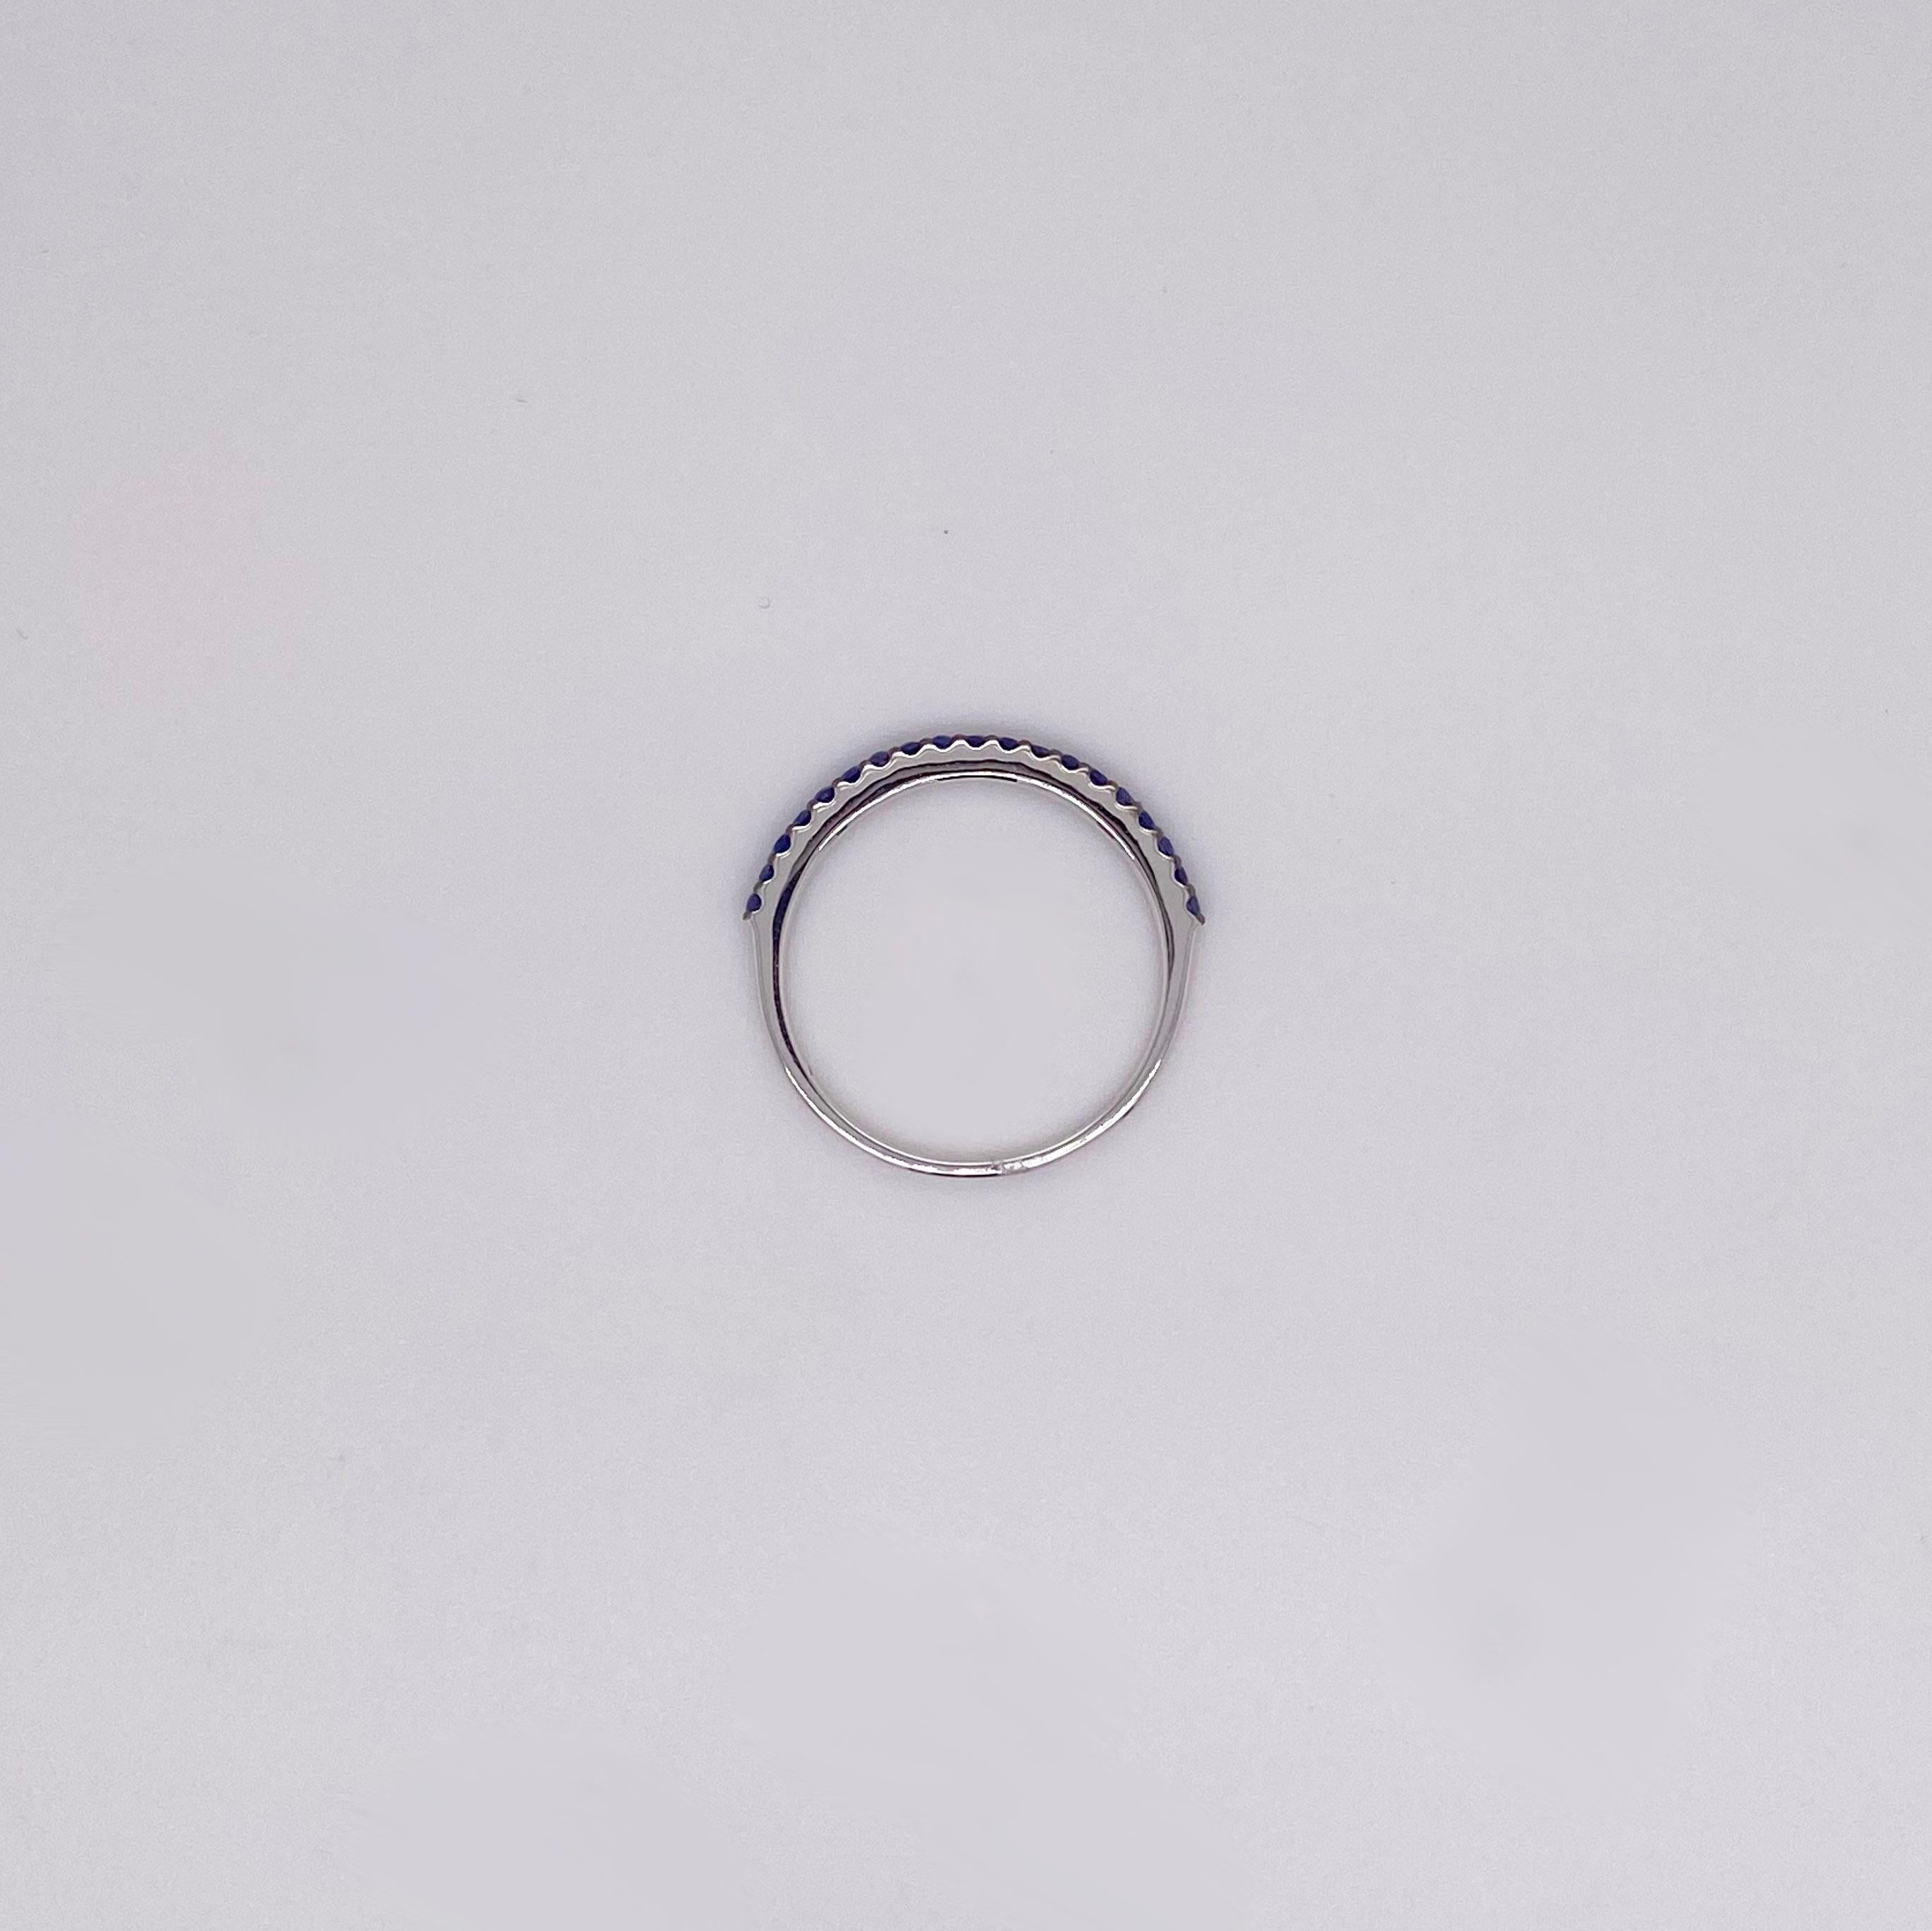 For Sale:  Sapphire Band Ring, White Gold, Simple Straight 1/2 Band 3